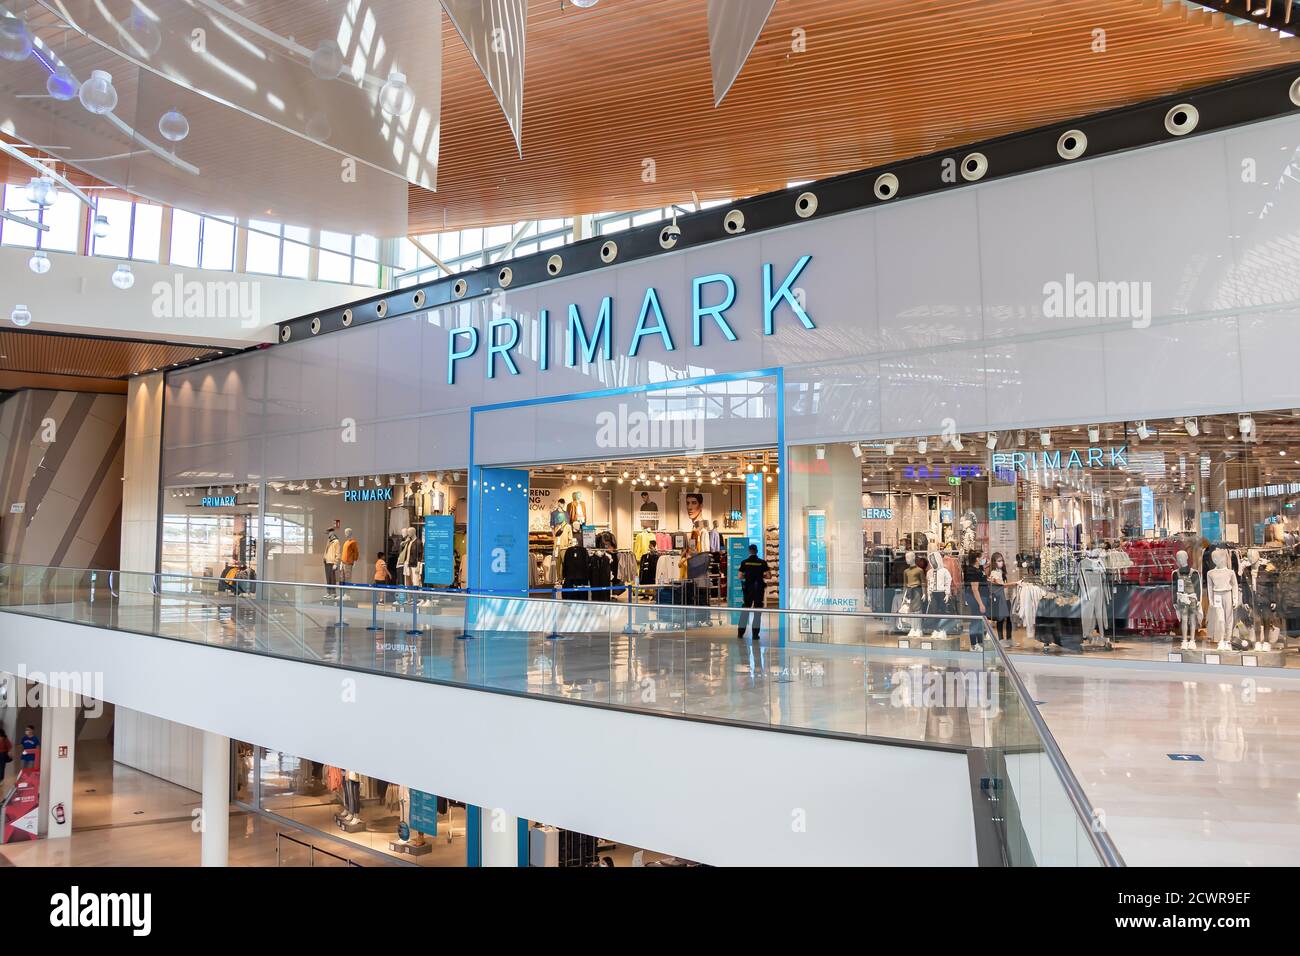 Seville, Spain - September 18, 2020: Primark Store in Lagoh shopping mall. Offers a diverse range of products, baby and children's clothing, womenswea Stock Photo